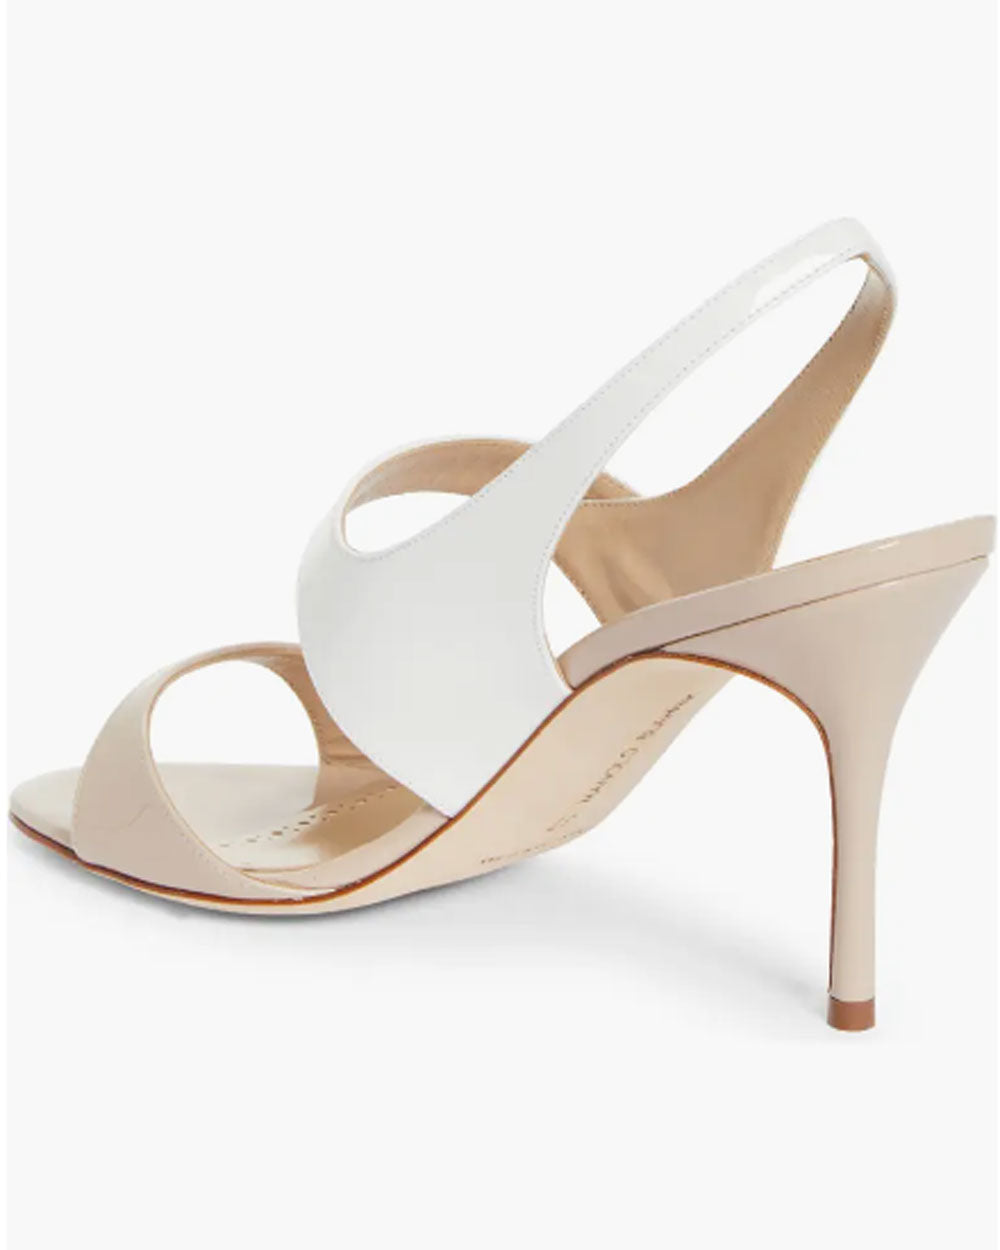 Climnetra Slingback in Cream and White